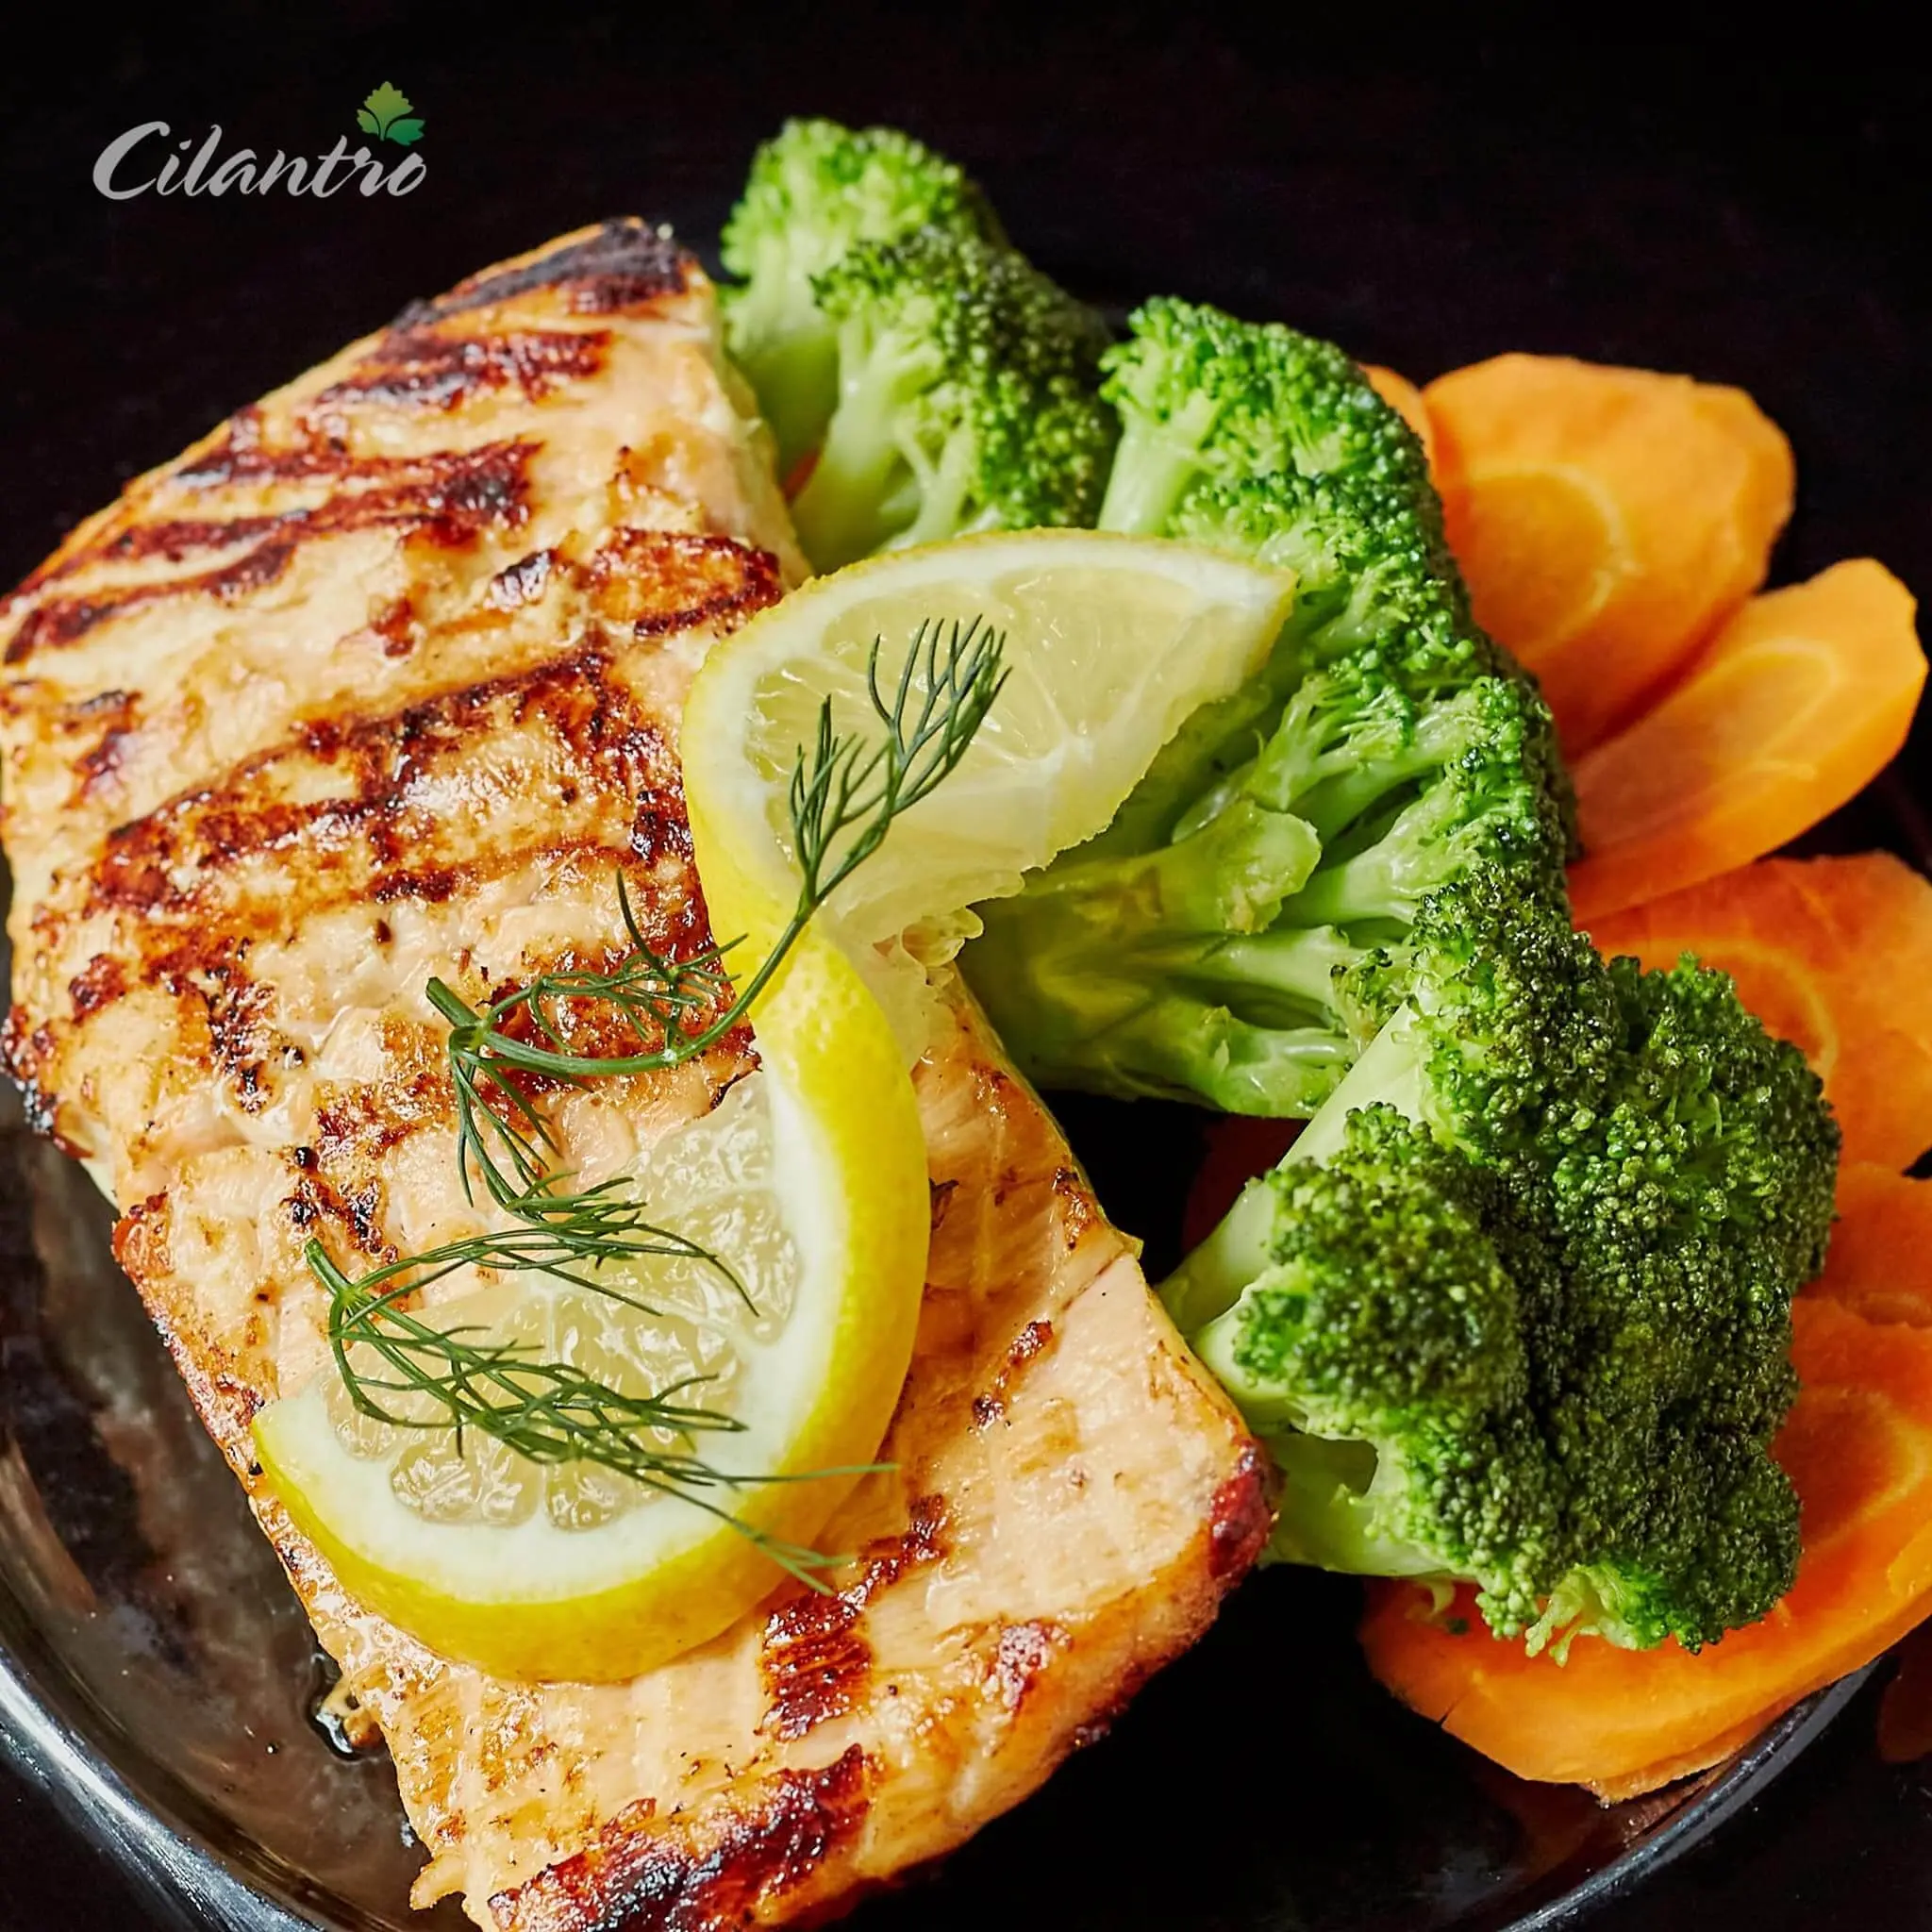 Elevate your plate with best masala coated and perfectly grilled salmon with grilled Veggies